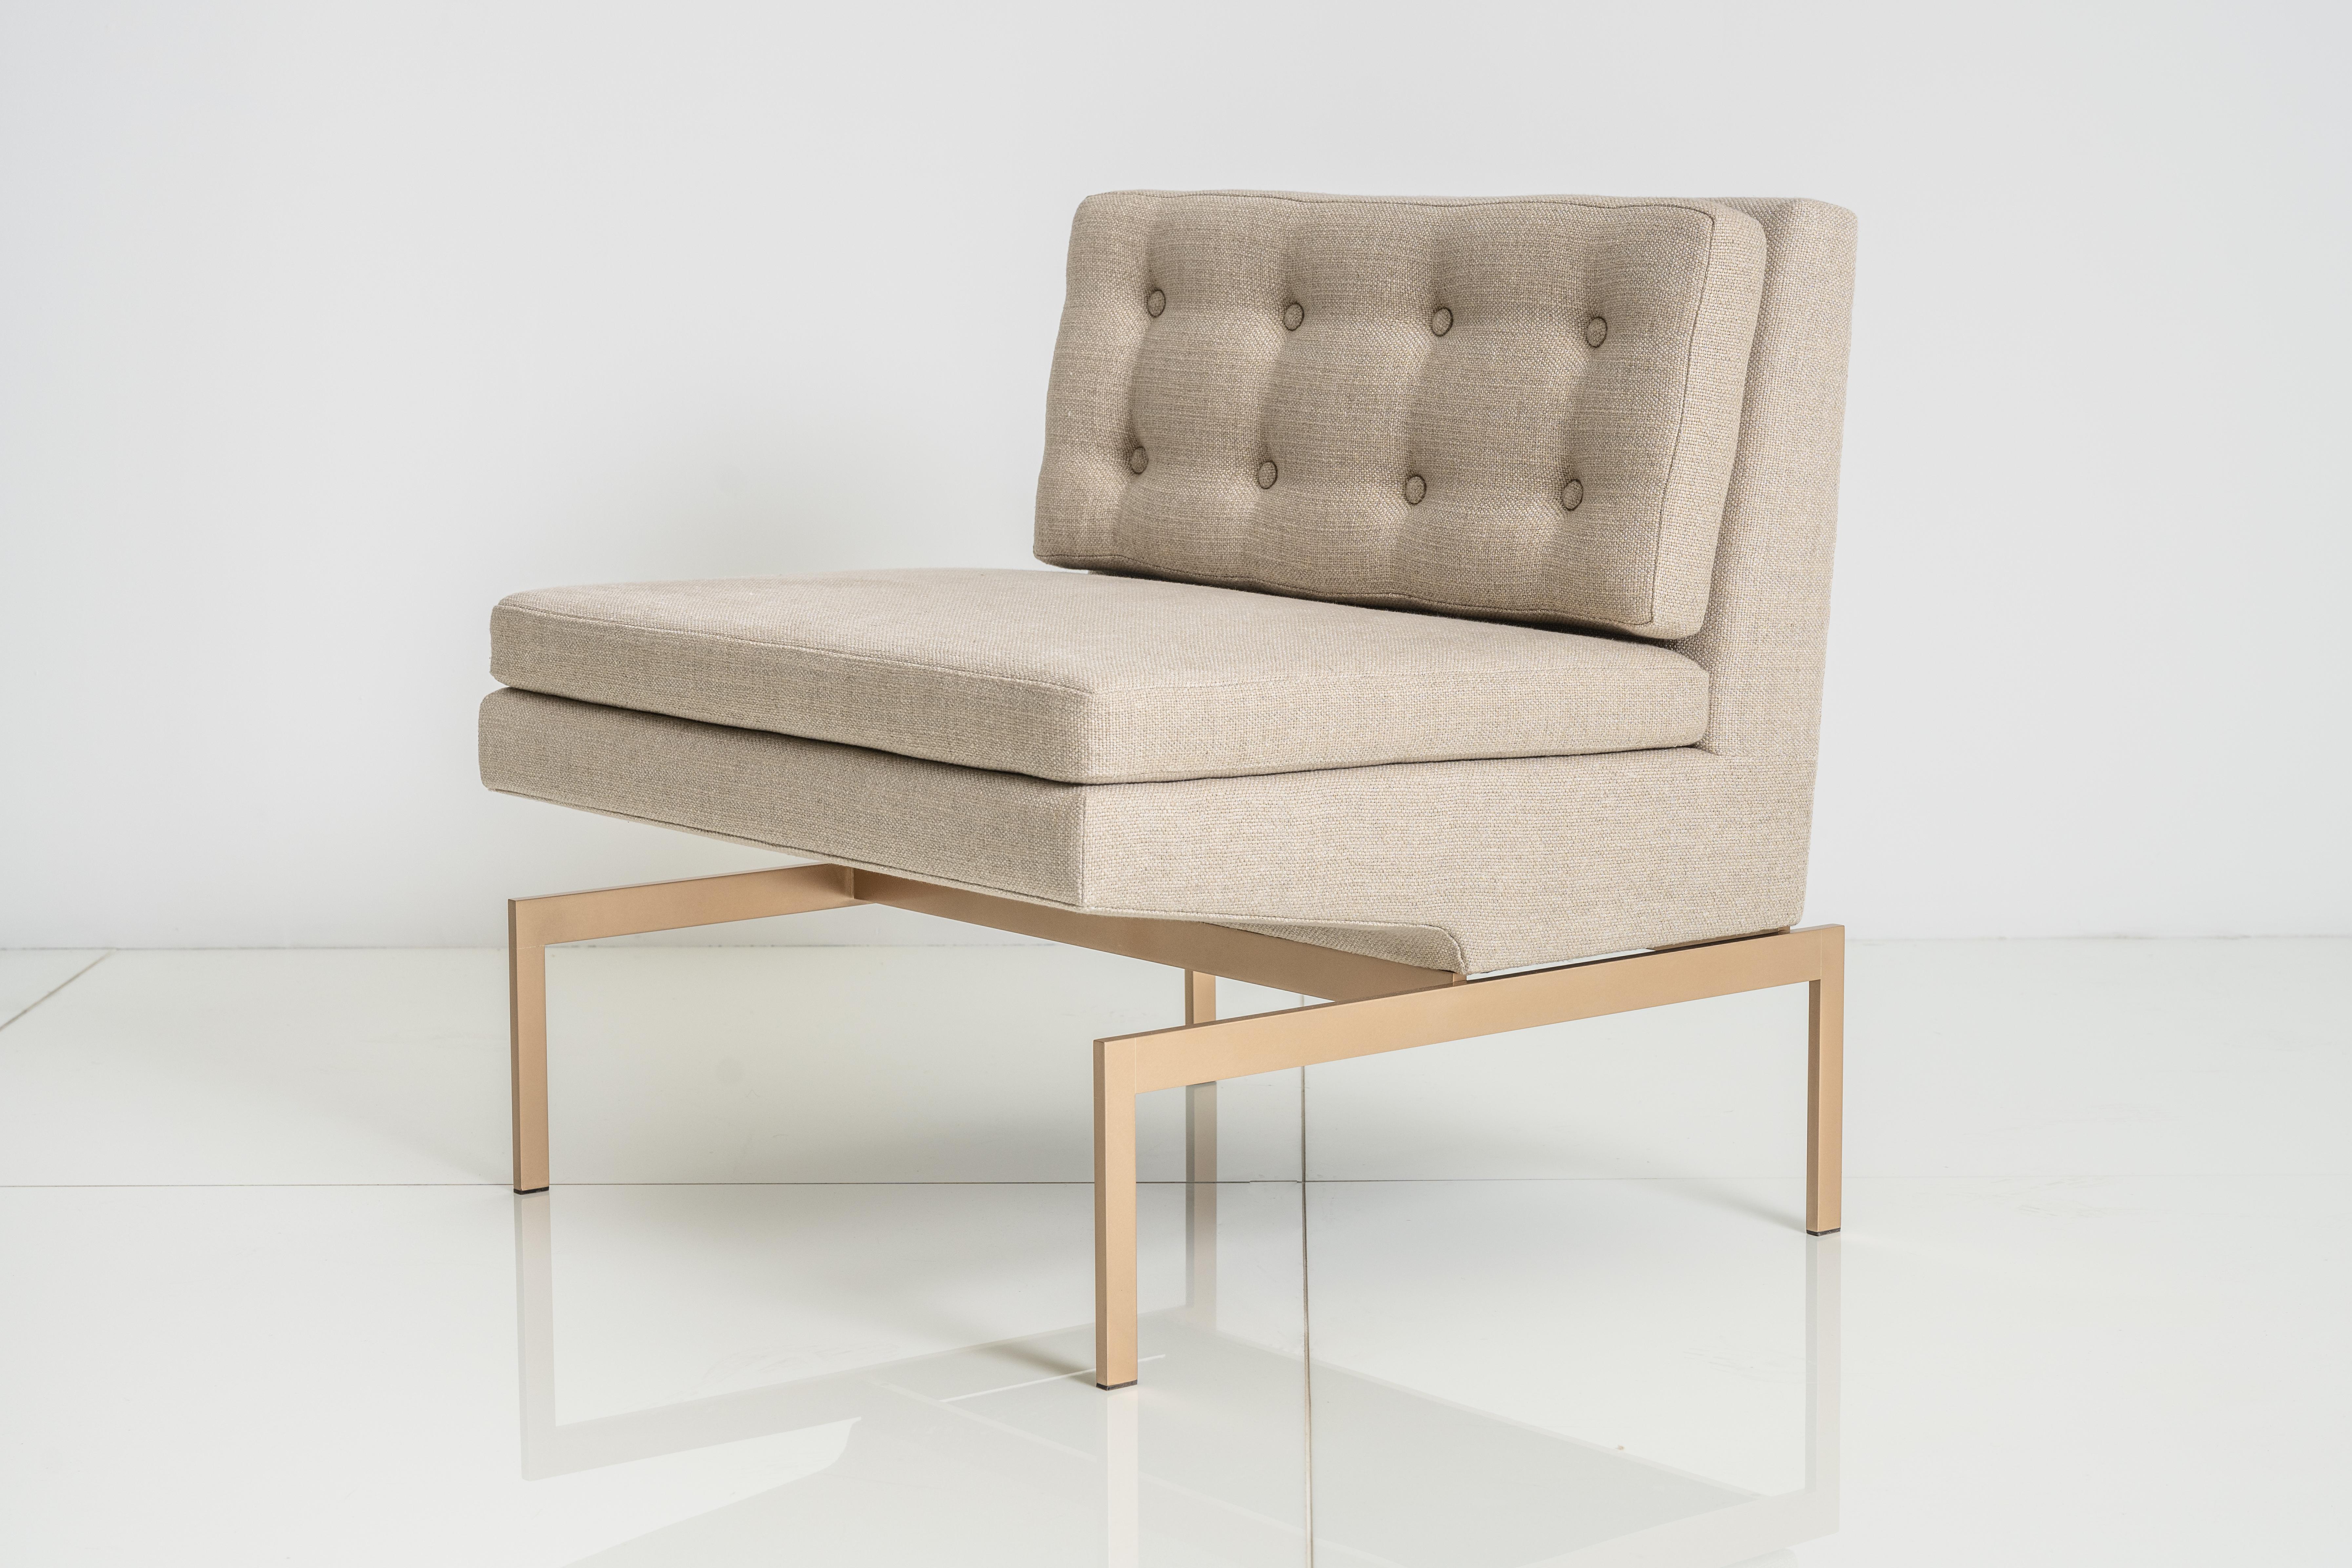 The Mancini Chair has a seat specially constructed to float above the metal base. The semi-attached seat and back cushions afford an extra layer of comfort.